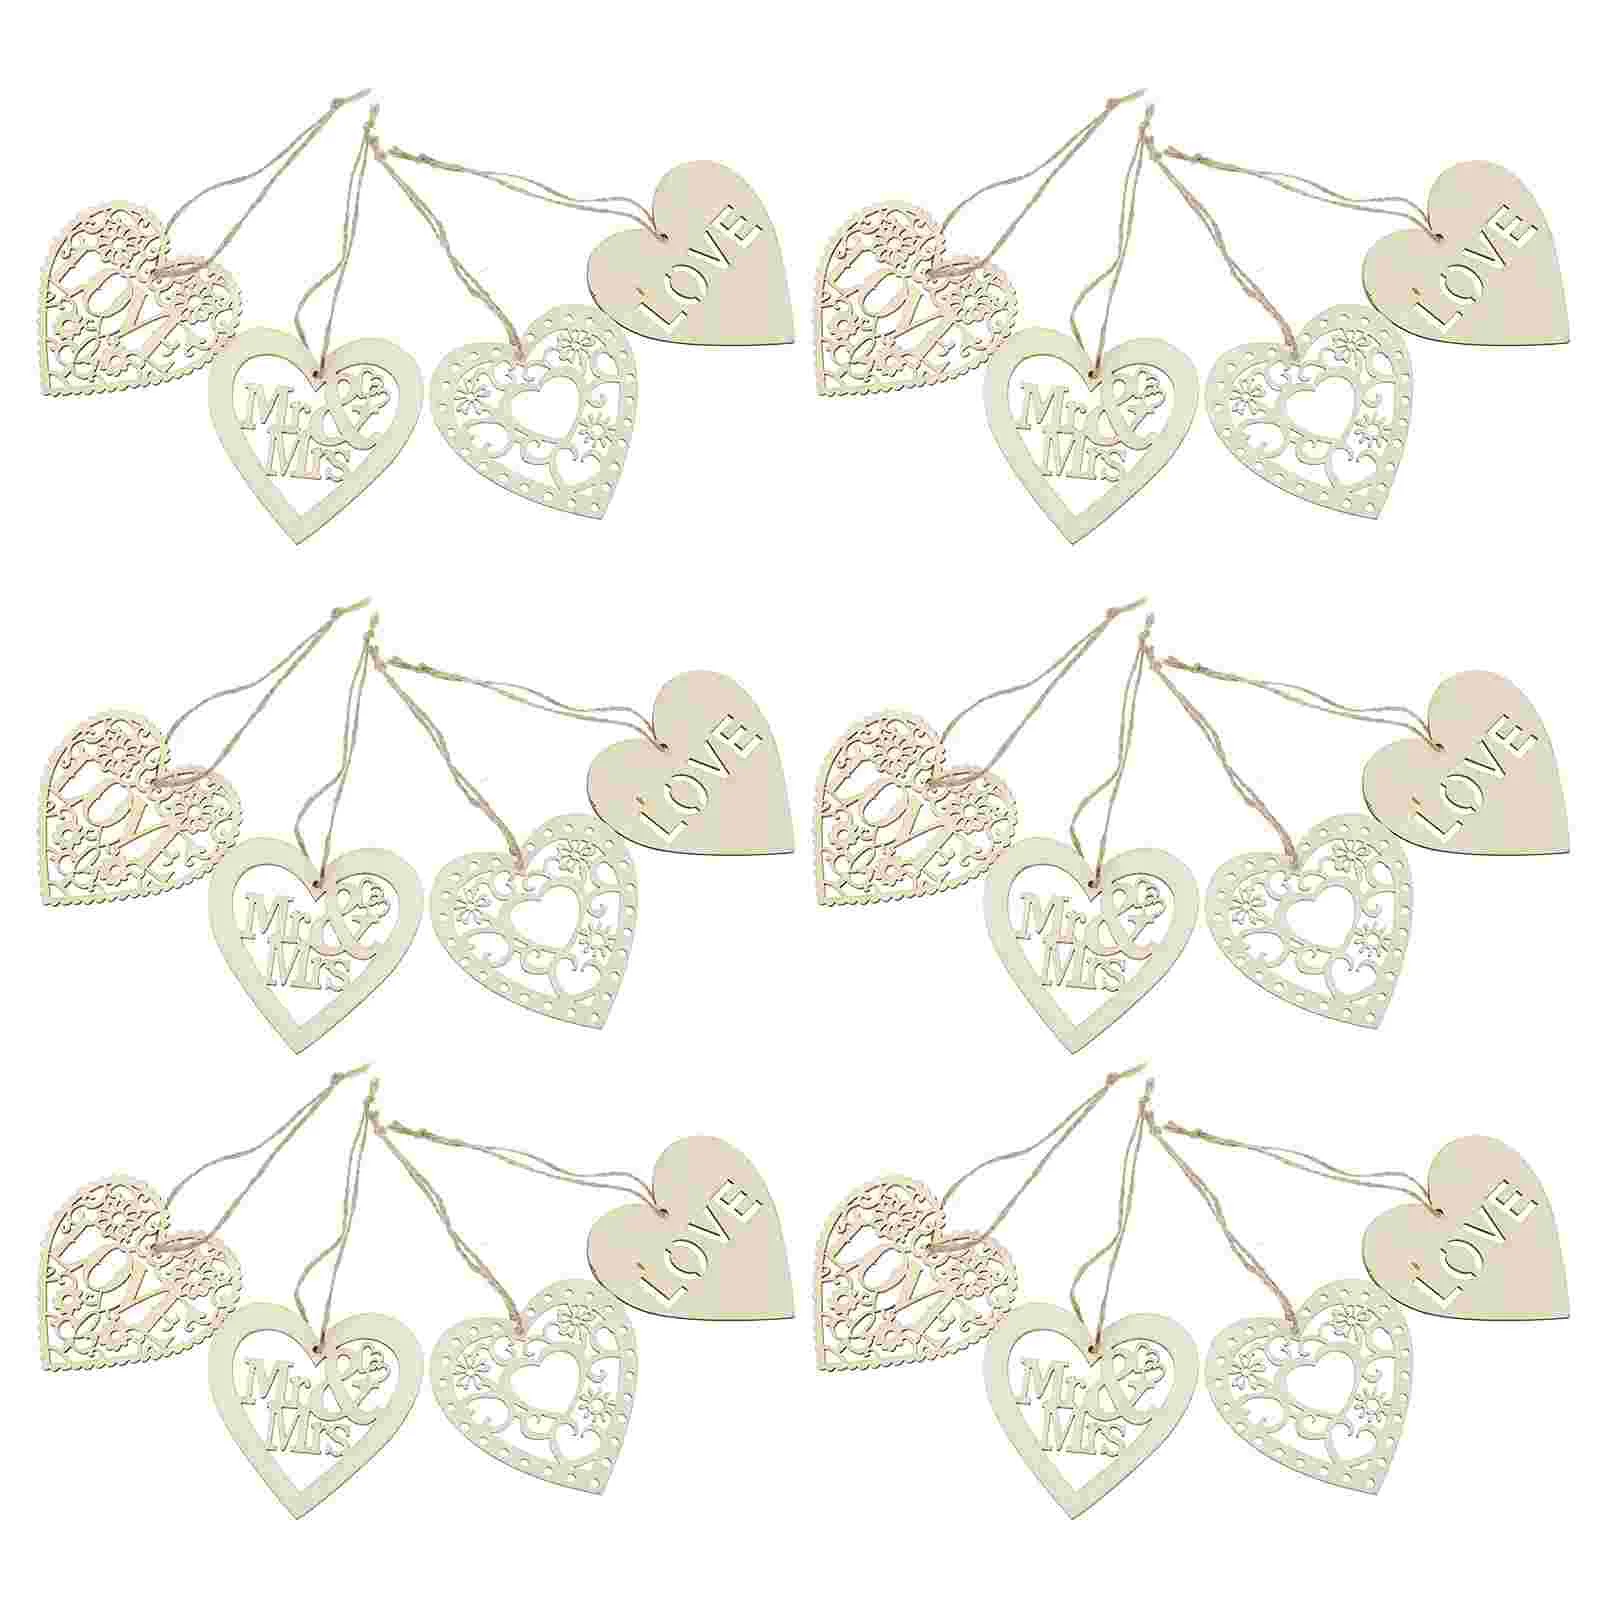 

4 Sets Valentine's Day Ornaments Wooden Slices Unfinished Heart Shaped Crafts Hearts Decor Sign Blank Chip Pendant DIY